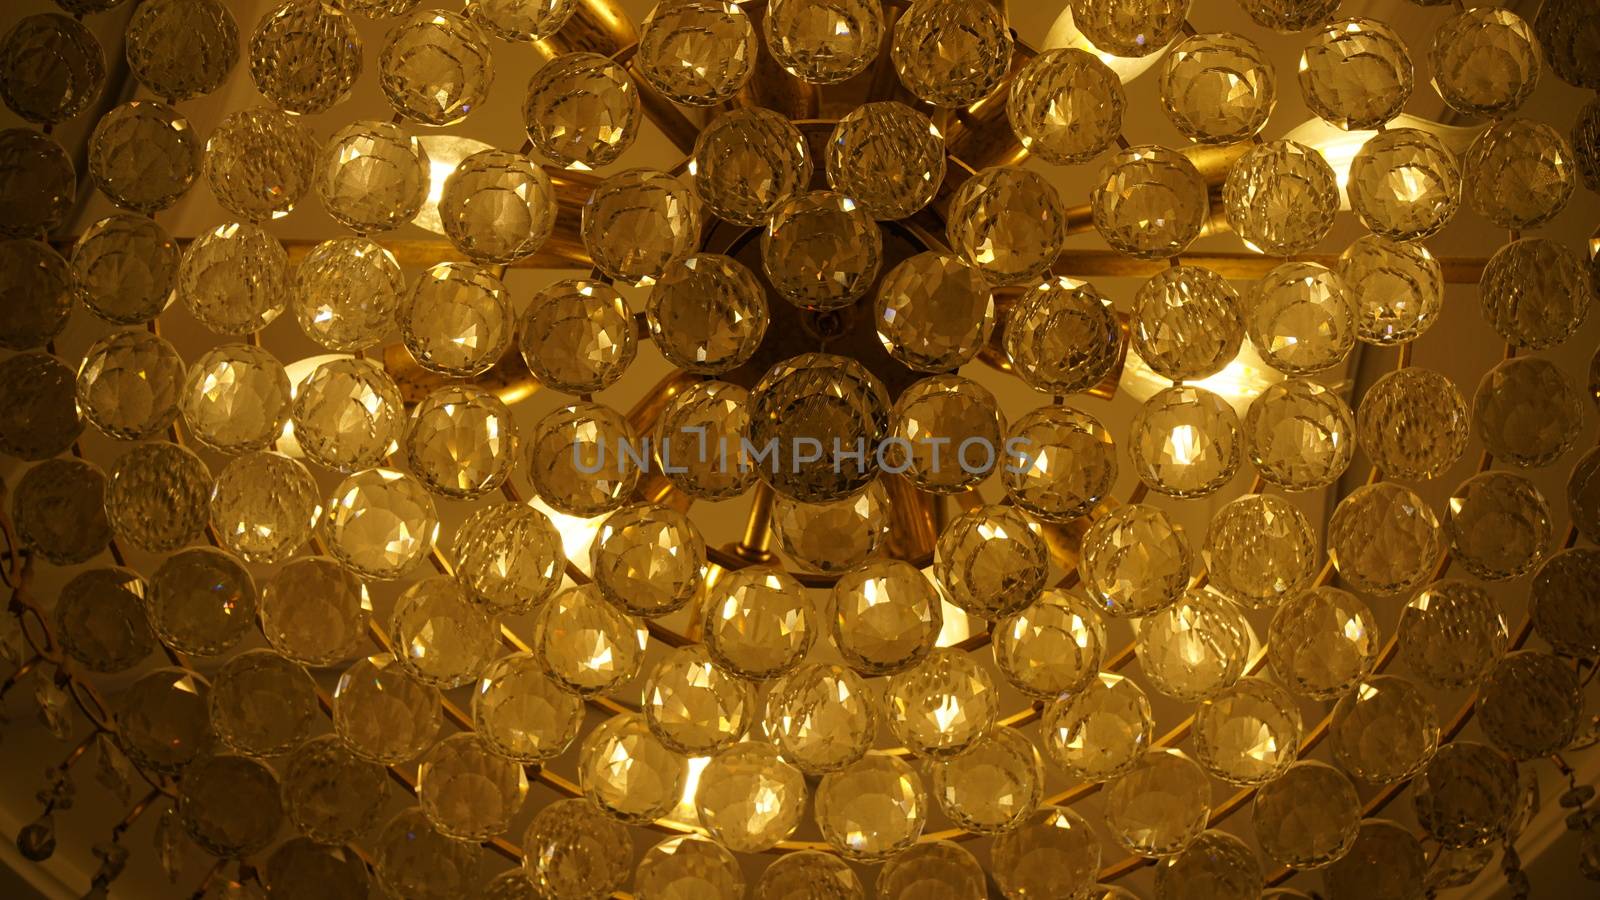 Crystal ball chandelier decorated on a ceiling wall design